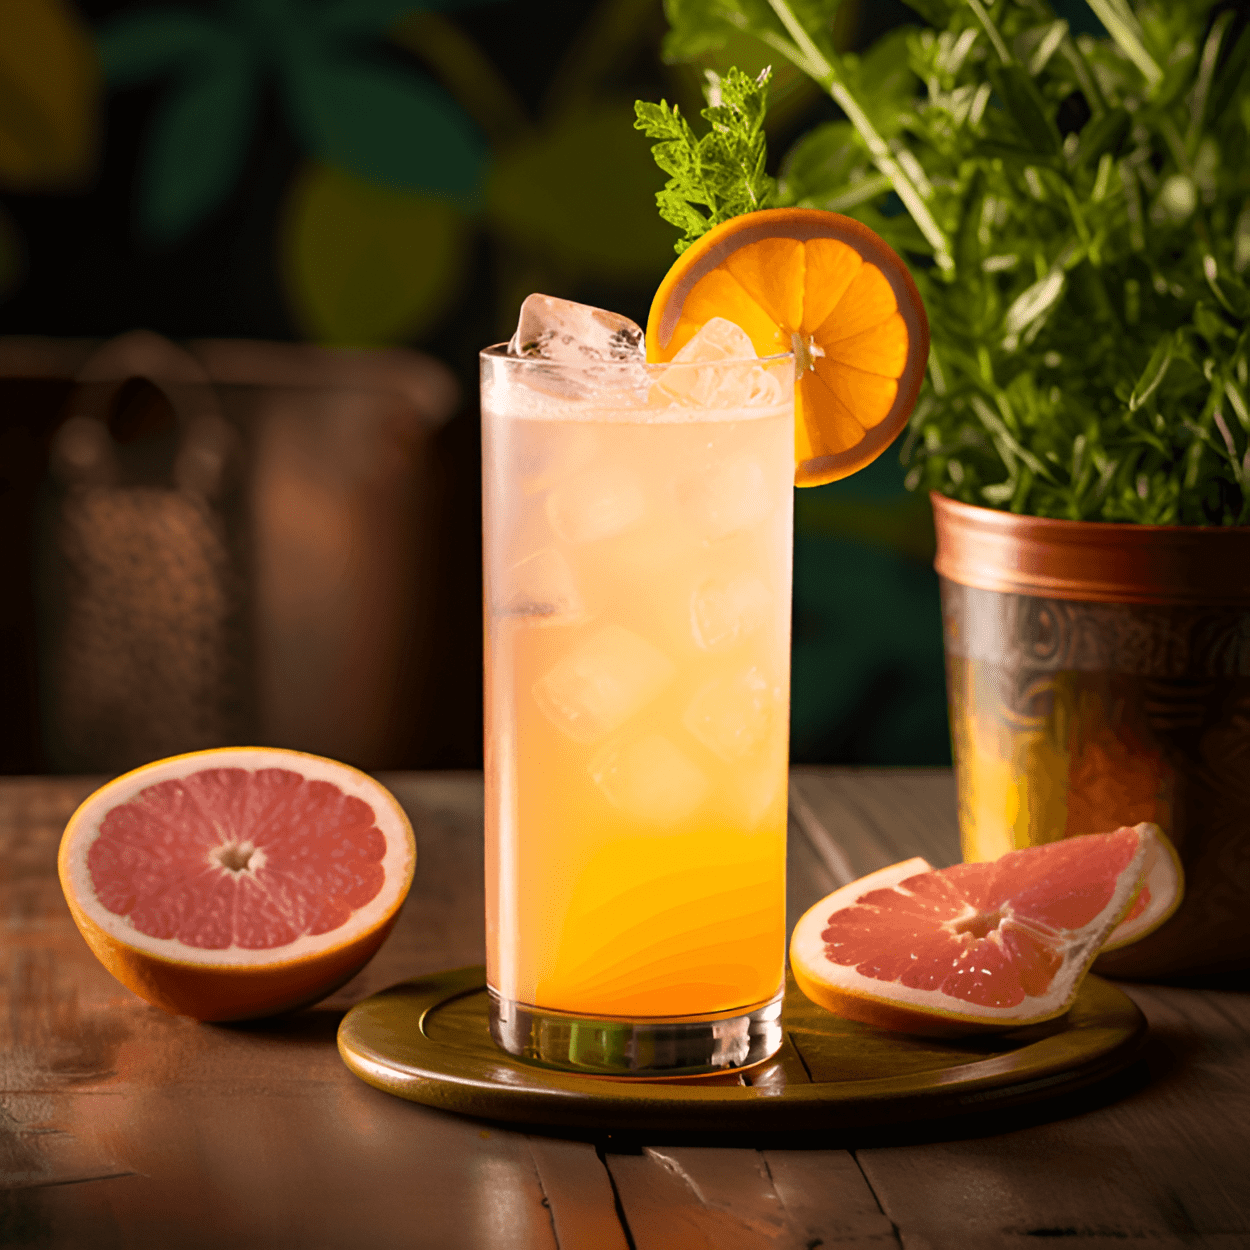 Dirty Blonde Cocktail Recipe - The Dirty Blonde is a delightful balance of sweet, sour, and strong. The peach schnapps adds a sweet, fruity flavor, while the grapefruit juice provides a tart, citrusy note. The vodka gives the cocktail its strong, boozy kick.